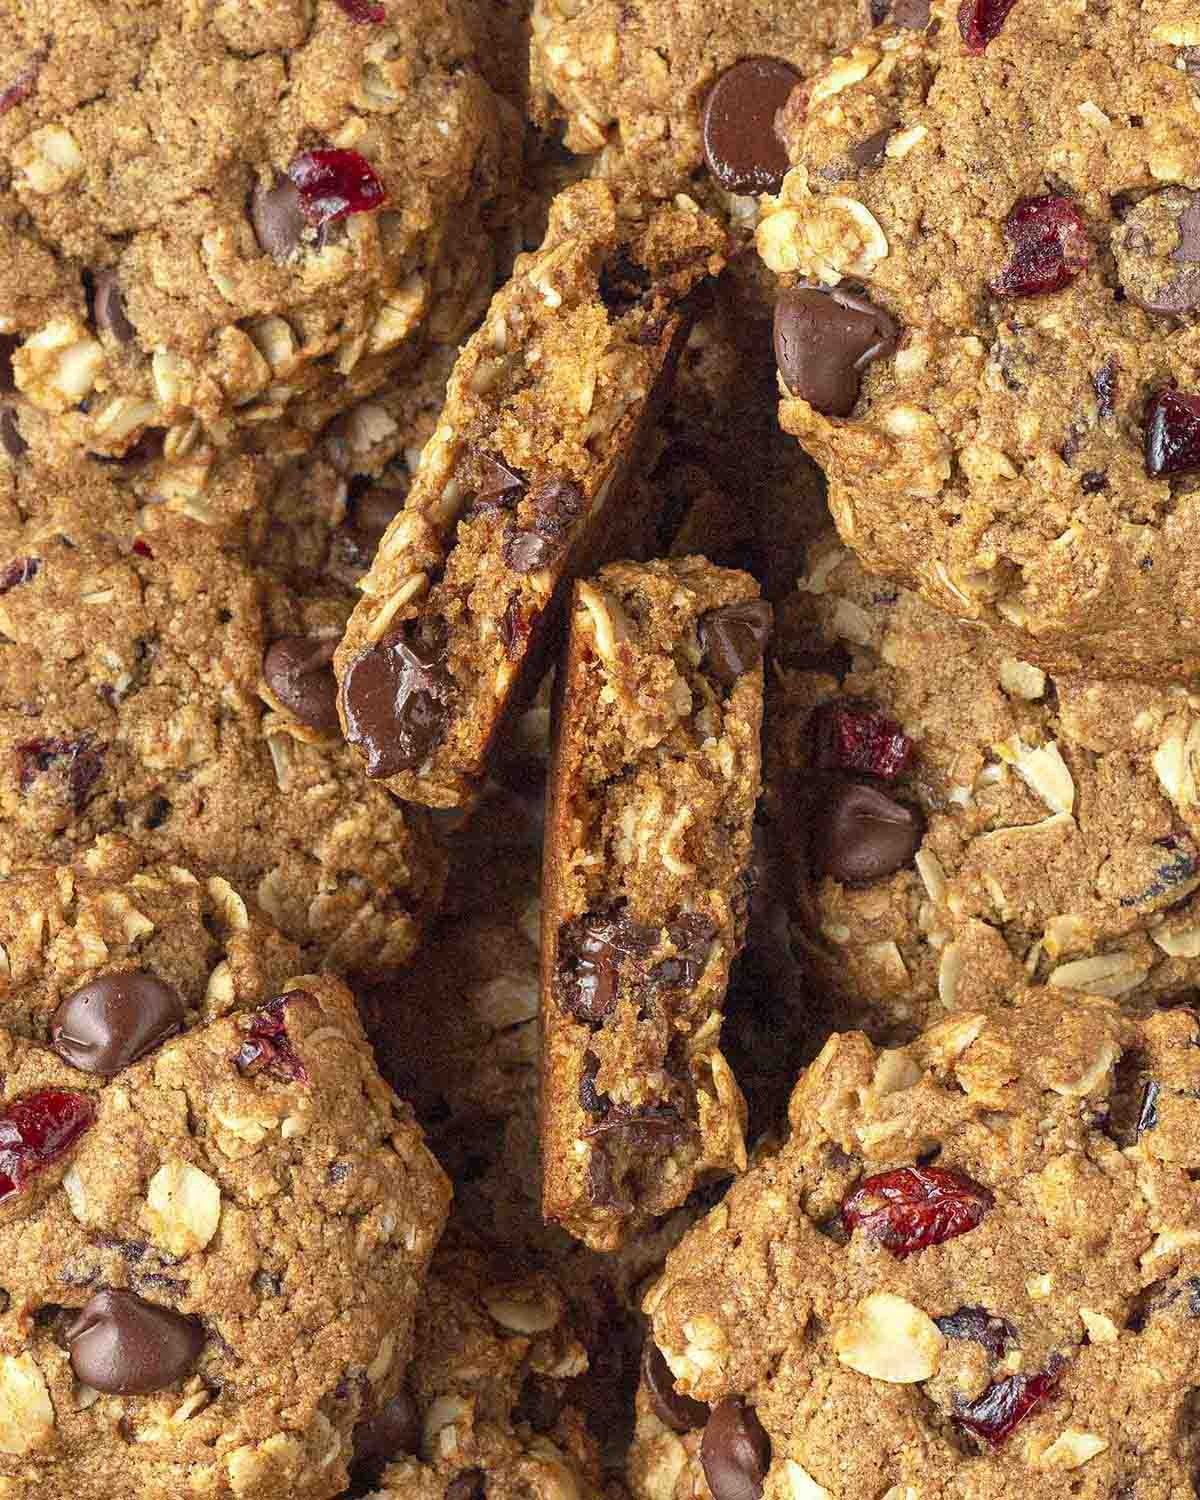 A plate full of vegan oatmeal cranberry cookies with chocolate chips, one cookie has been broken to show the inner texture.